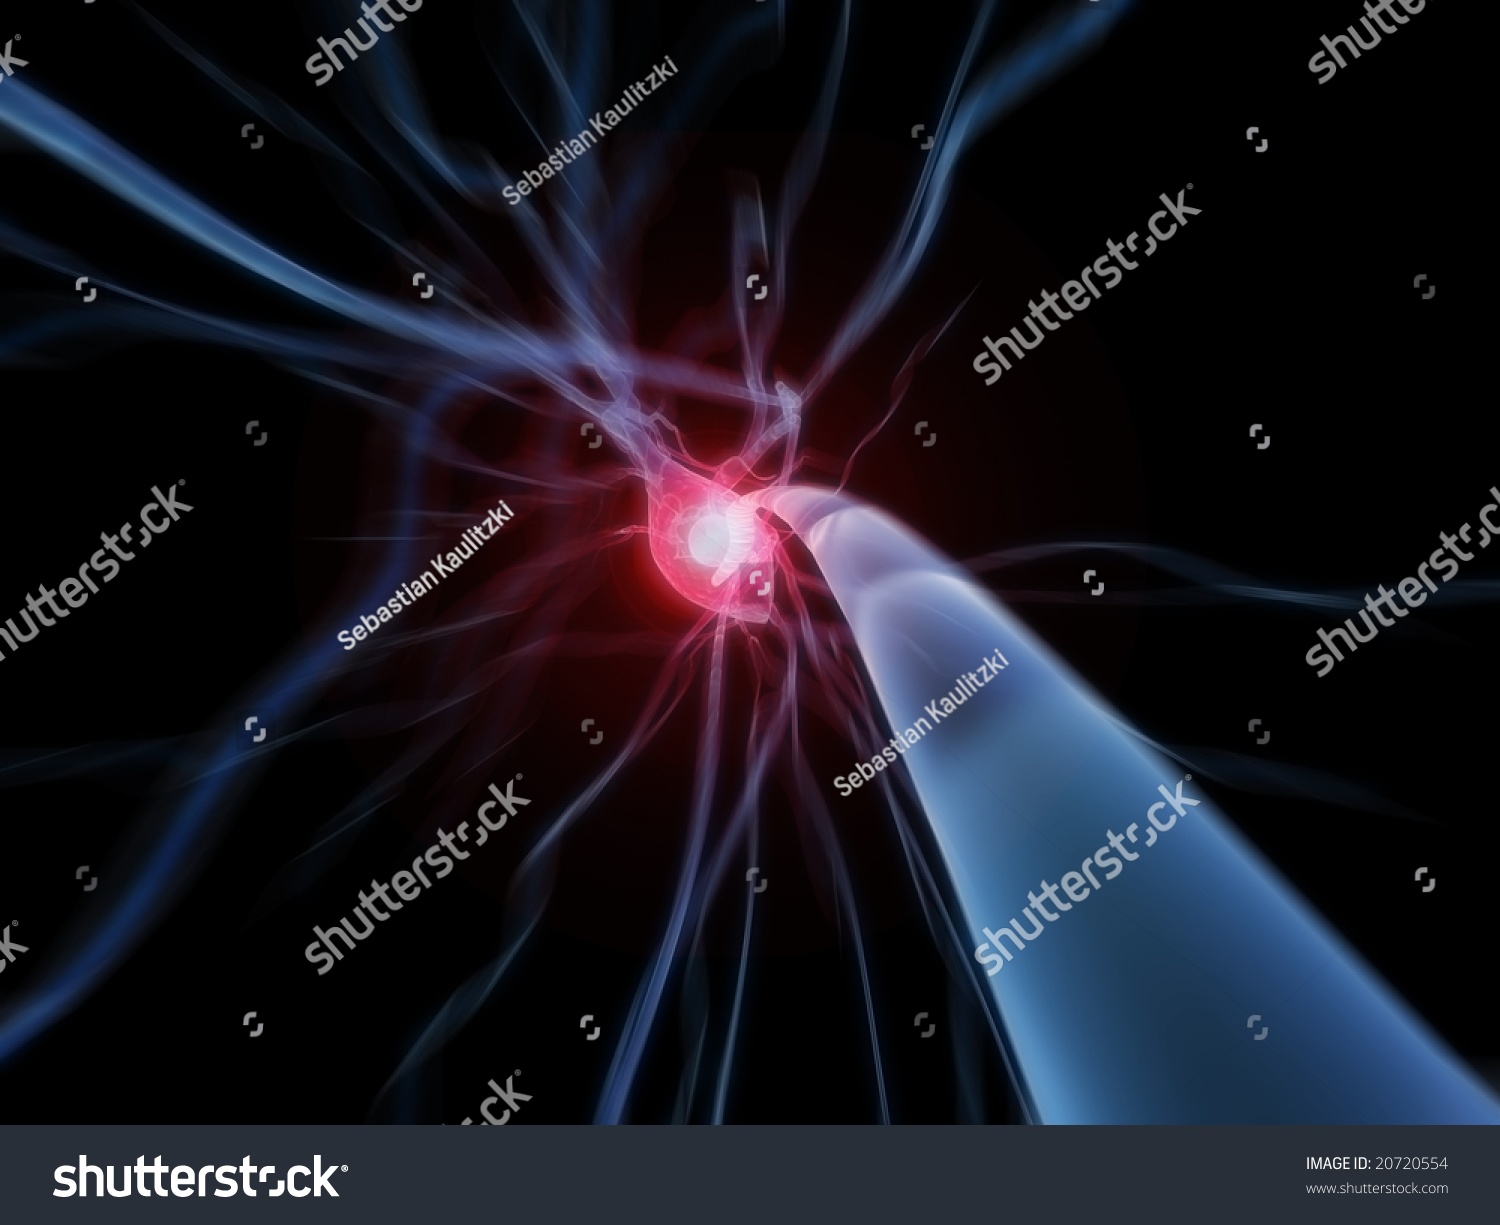 Active Nerve Cell Stock Photo 20720554 : Shutterstock